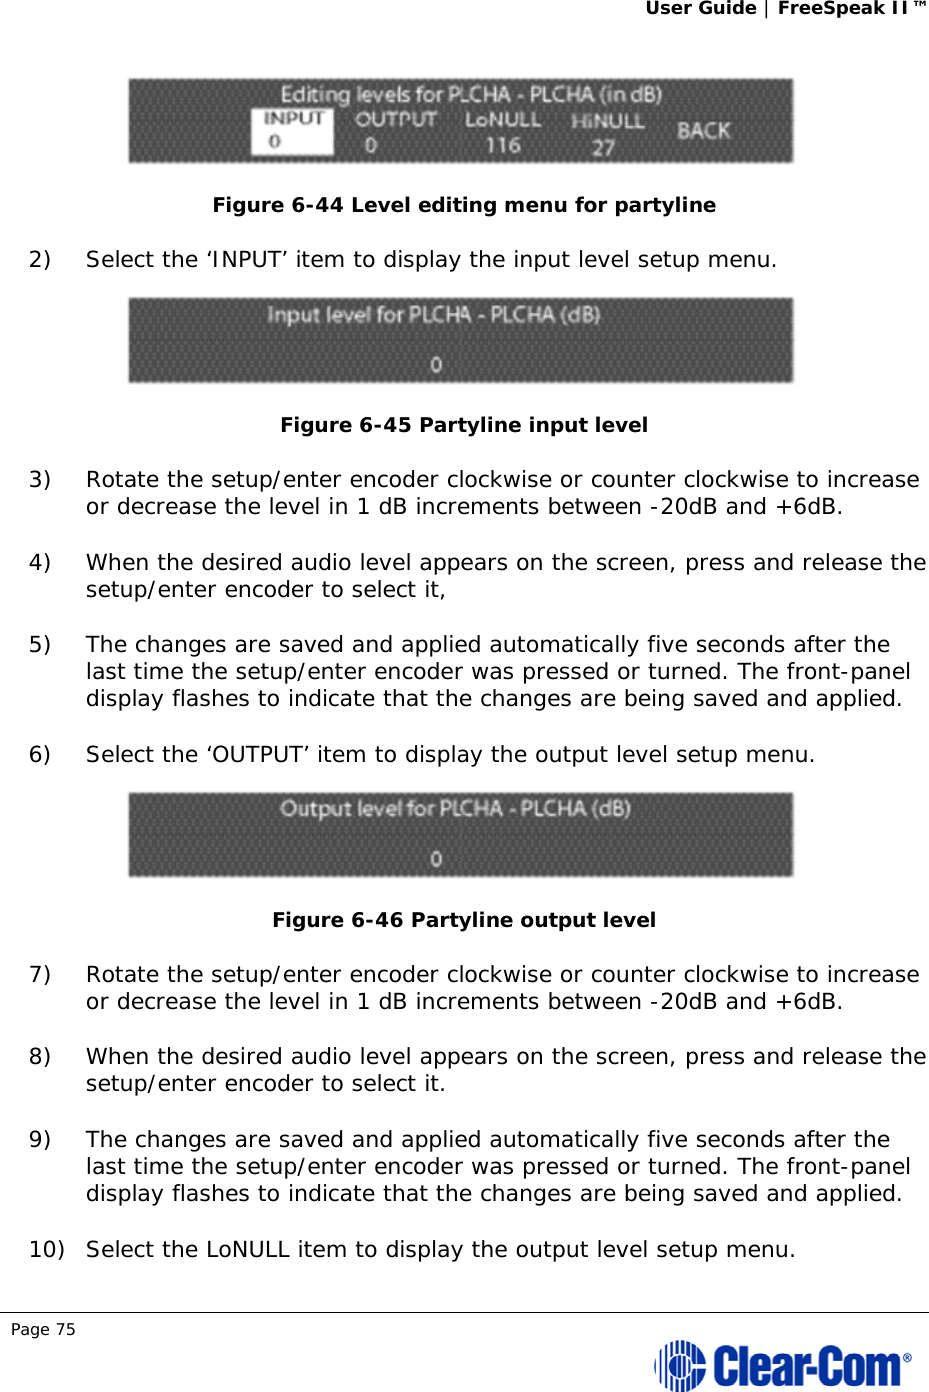 User Guide | FreeSpeak II™  Page 75   Figure 6-44 Level editing menu for partyline 2) Select the ‘INPUT’ item to display the input level setup menu.  Figure 6-45 Partyline input level 3) Rotate the setup/enter encoder clockwise or counter clockwise to increase or decrease the level in 1 dB increments between -20dB and +6dB.  4) When the desired audio level appears on the screen, press and release the setup/enter encoder to select it,  5) The changes are saved and applied automatically five seconds after the last time the setup/enter encoder was pressed or turned. The front-panel display flashes to indicate that the changes are being saved and applied.  6) Select the ‘OUTPUT’ item to display the output level setup menu.  Figure 6-46 Partyline output level 7) Rotate the setup/enter encoder clockwise or counter clockwise to increase or decrease the level in 1 dB increments between -20dB and +6dB.  8) When the desired audio level appears on the screen, press and release the setup/enter encoder to select it. 9) The changes are saved and applied automatically five seconds after the last time the setup/enter encoder was pressed or turned. The front-panel display flashes to indicate that the changes are being saved and applied.  10) Select the LoNULL item to display the output level setup menu. 